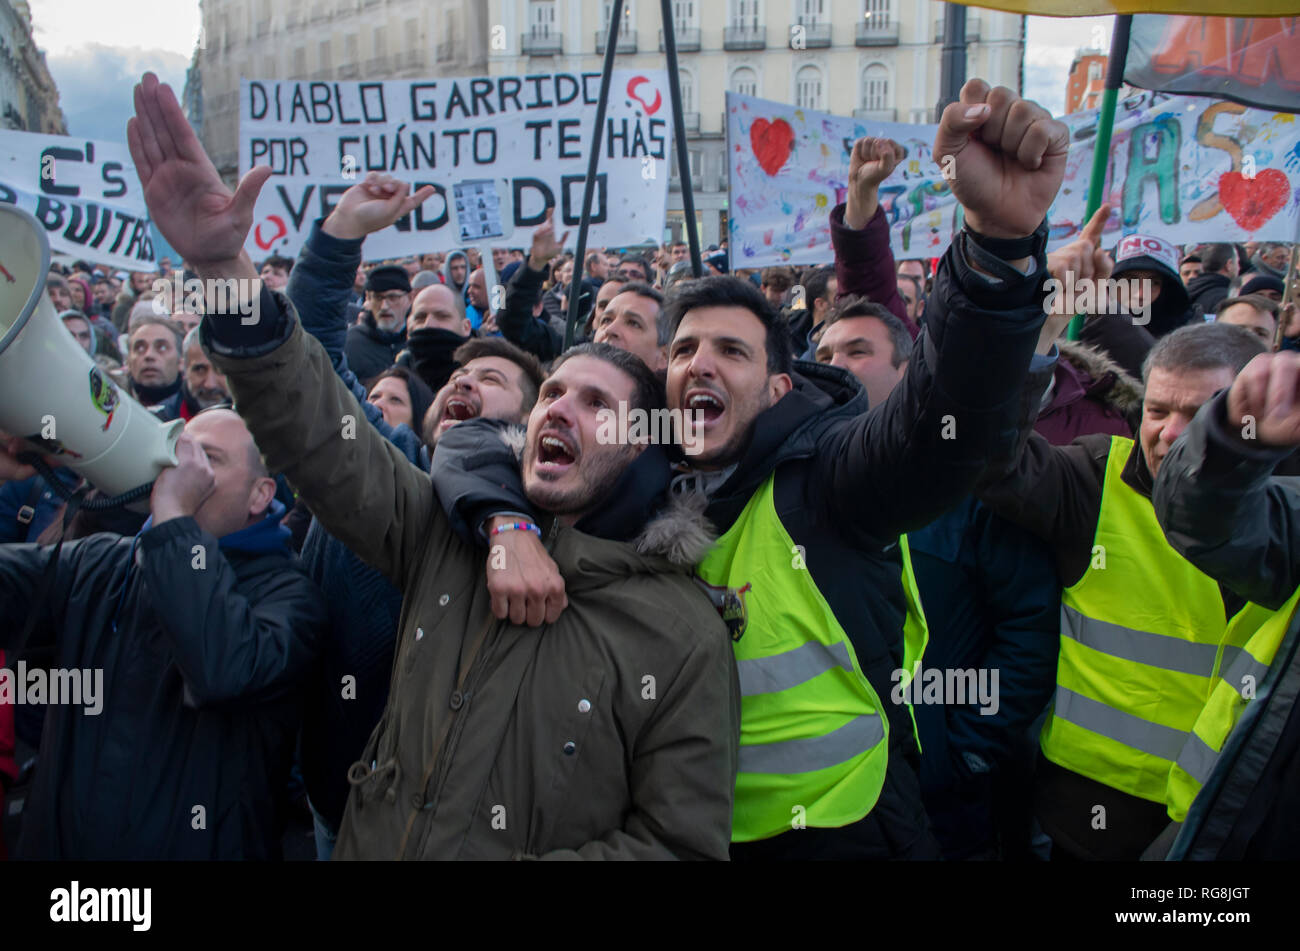 Madrid, Spain. 28th January 2019. Taxi drivers in Madrid have been on a strike for more than a week demanding the prohibition of Uber and Cabify in the Spanish capital-city.   Due to a lack of agreement, hundreds of taxi drivers protested at Puerta del Sol, Madrid’s central square. Credit: Lora Grigorova/Alamy Live News Stock Photo